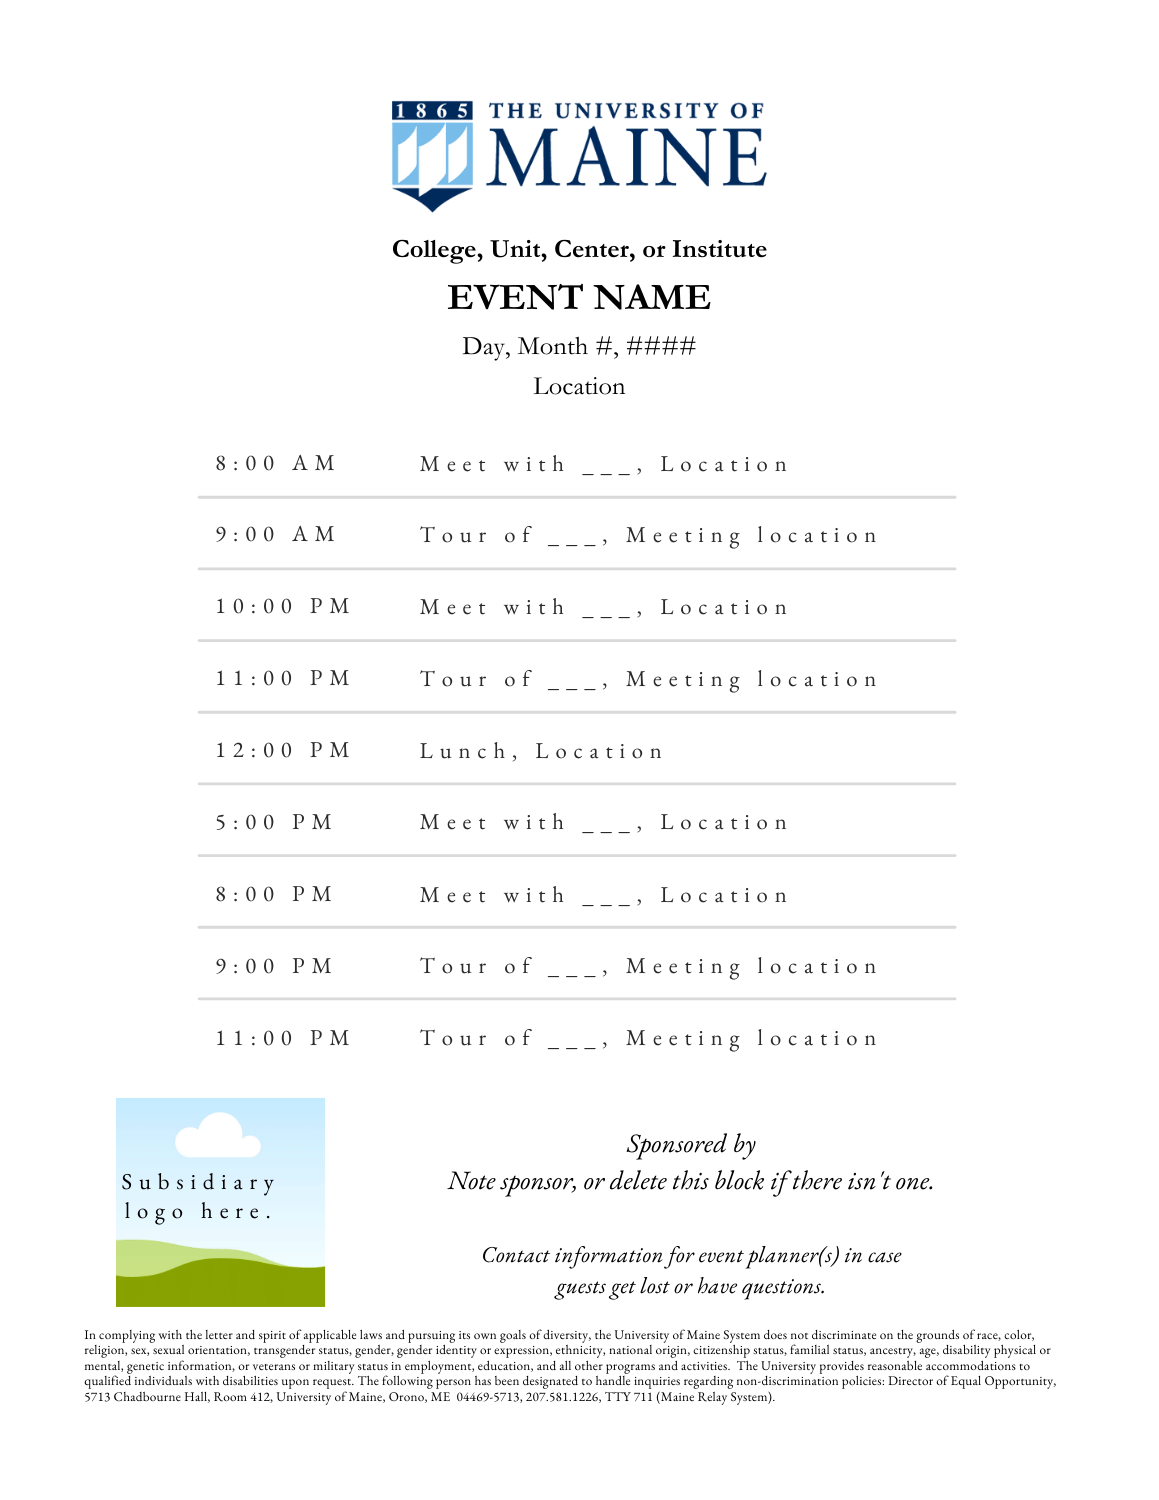 Image of event itinerary template with subsidiary logo